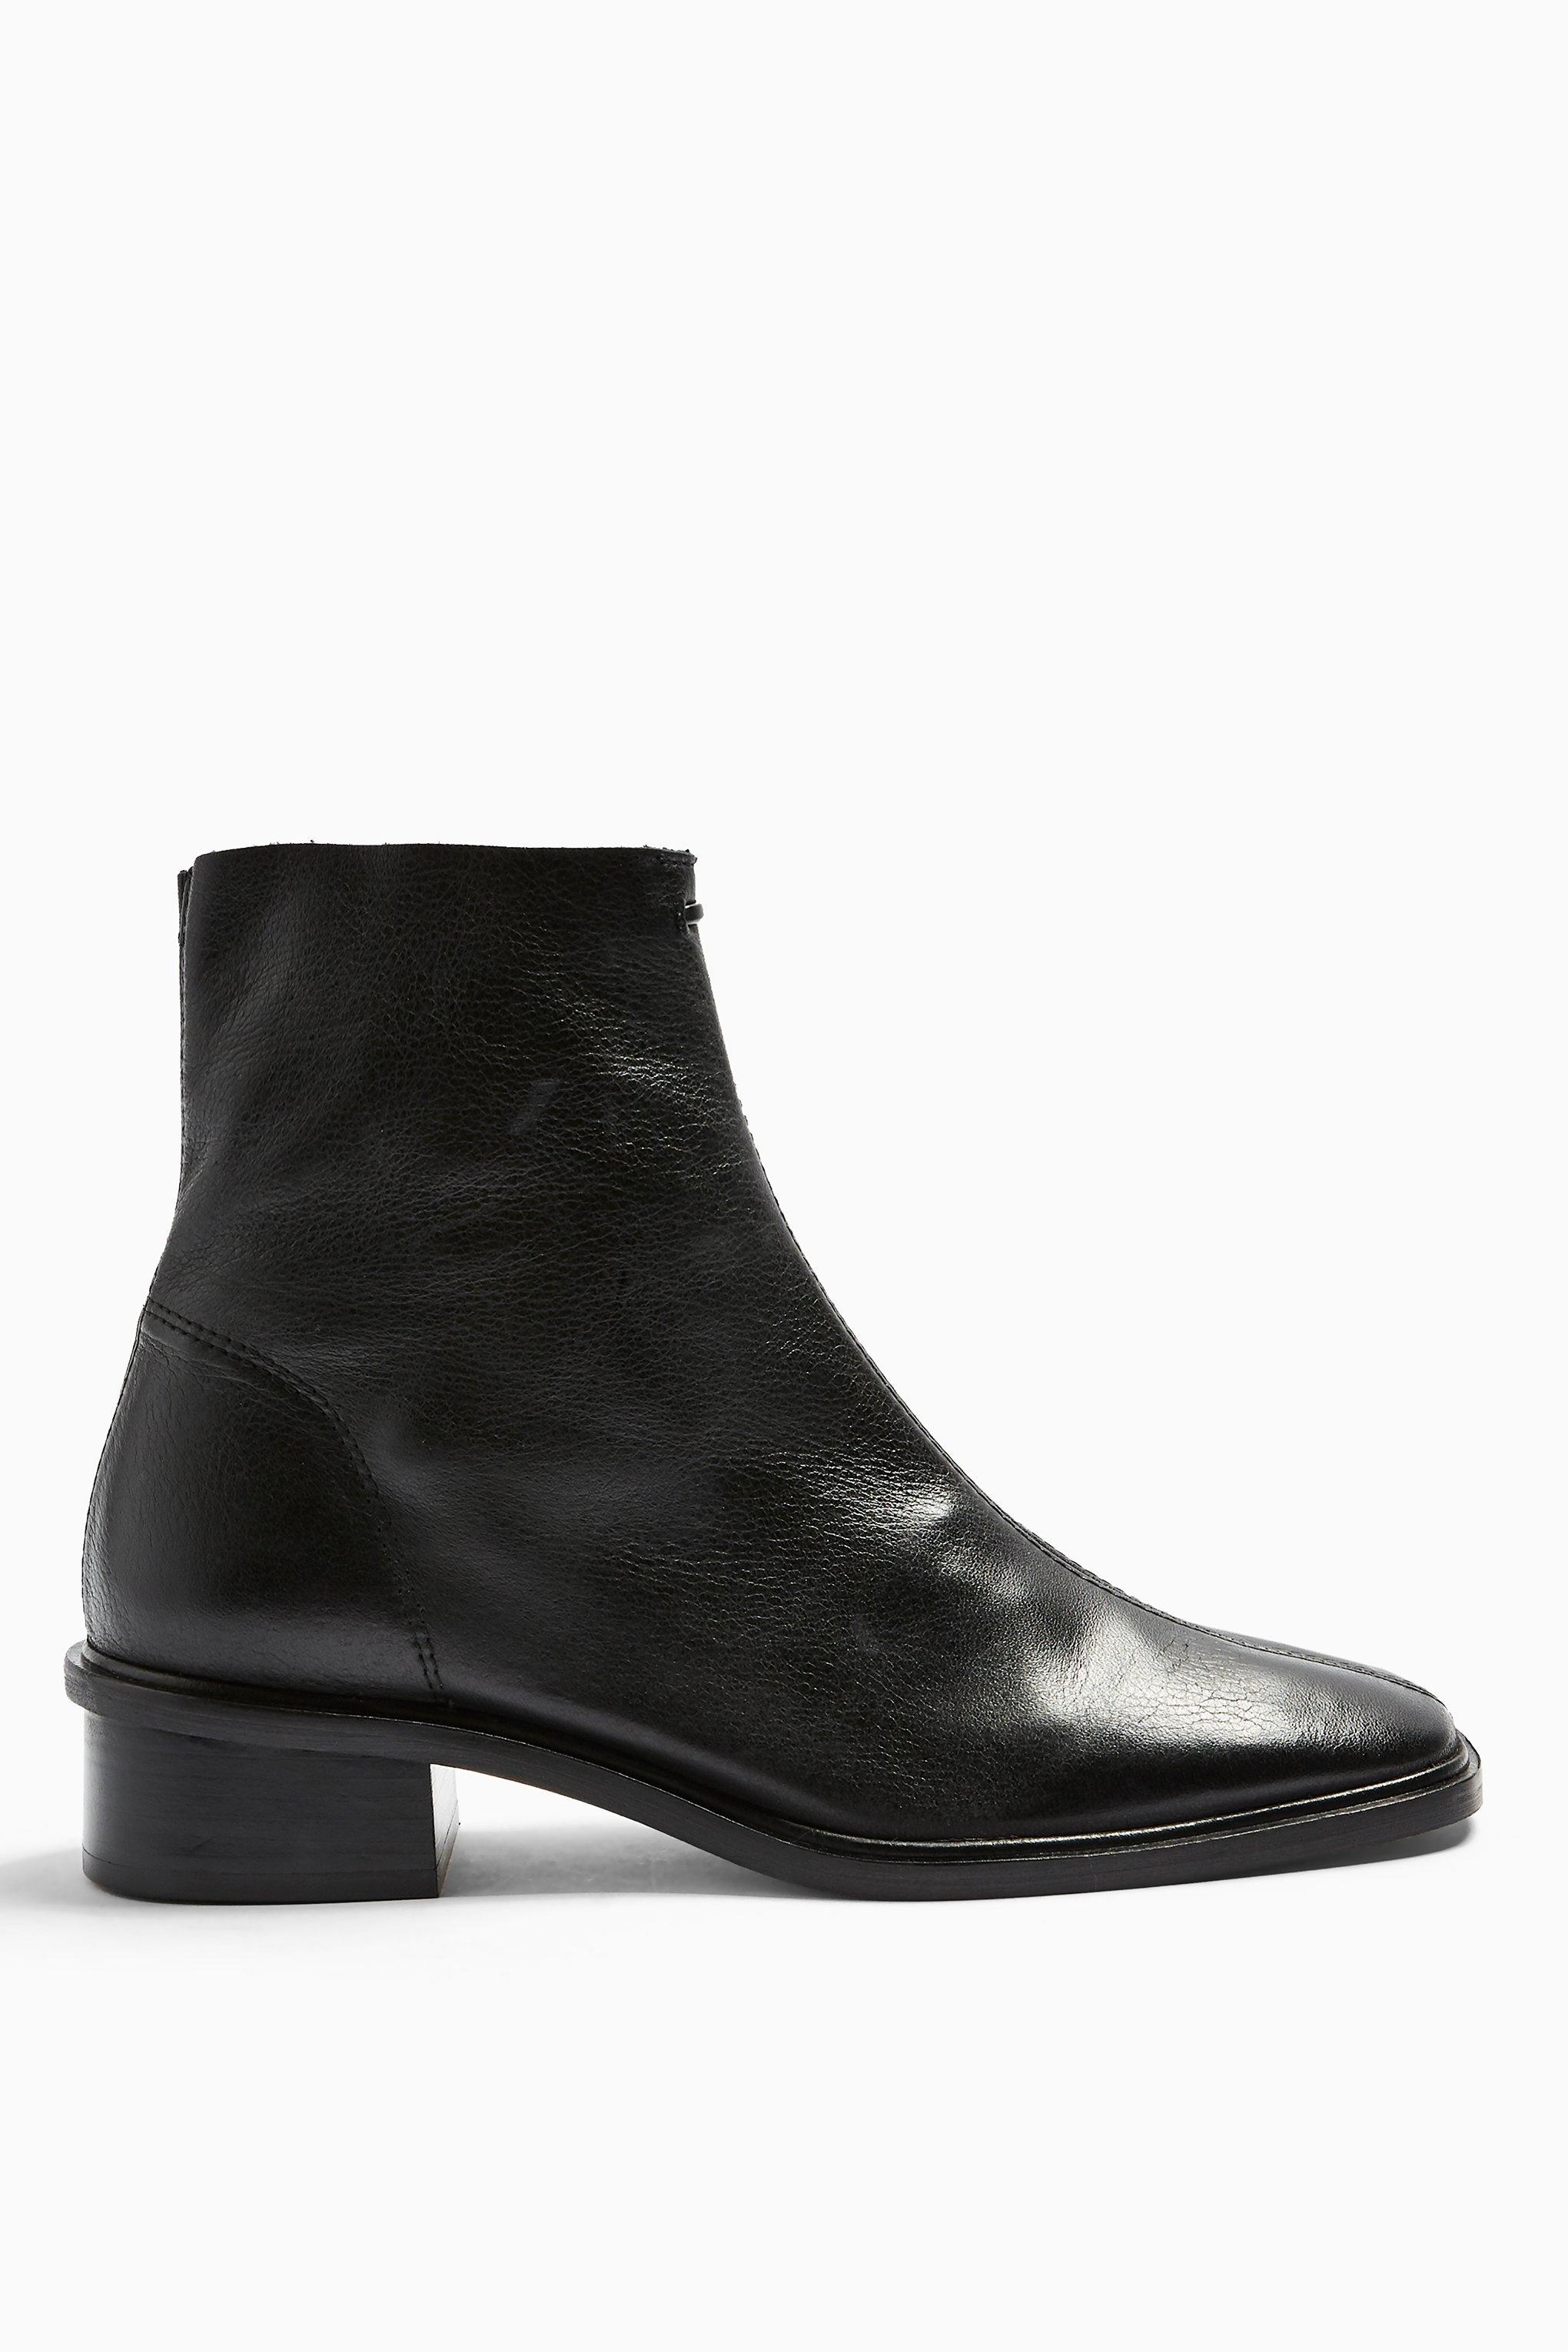 topshop black leather boots